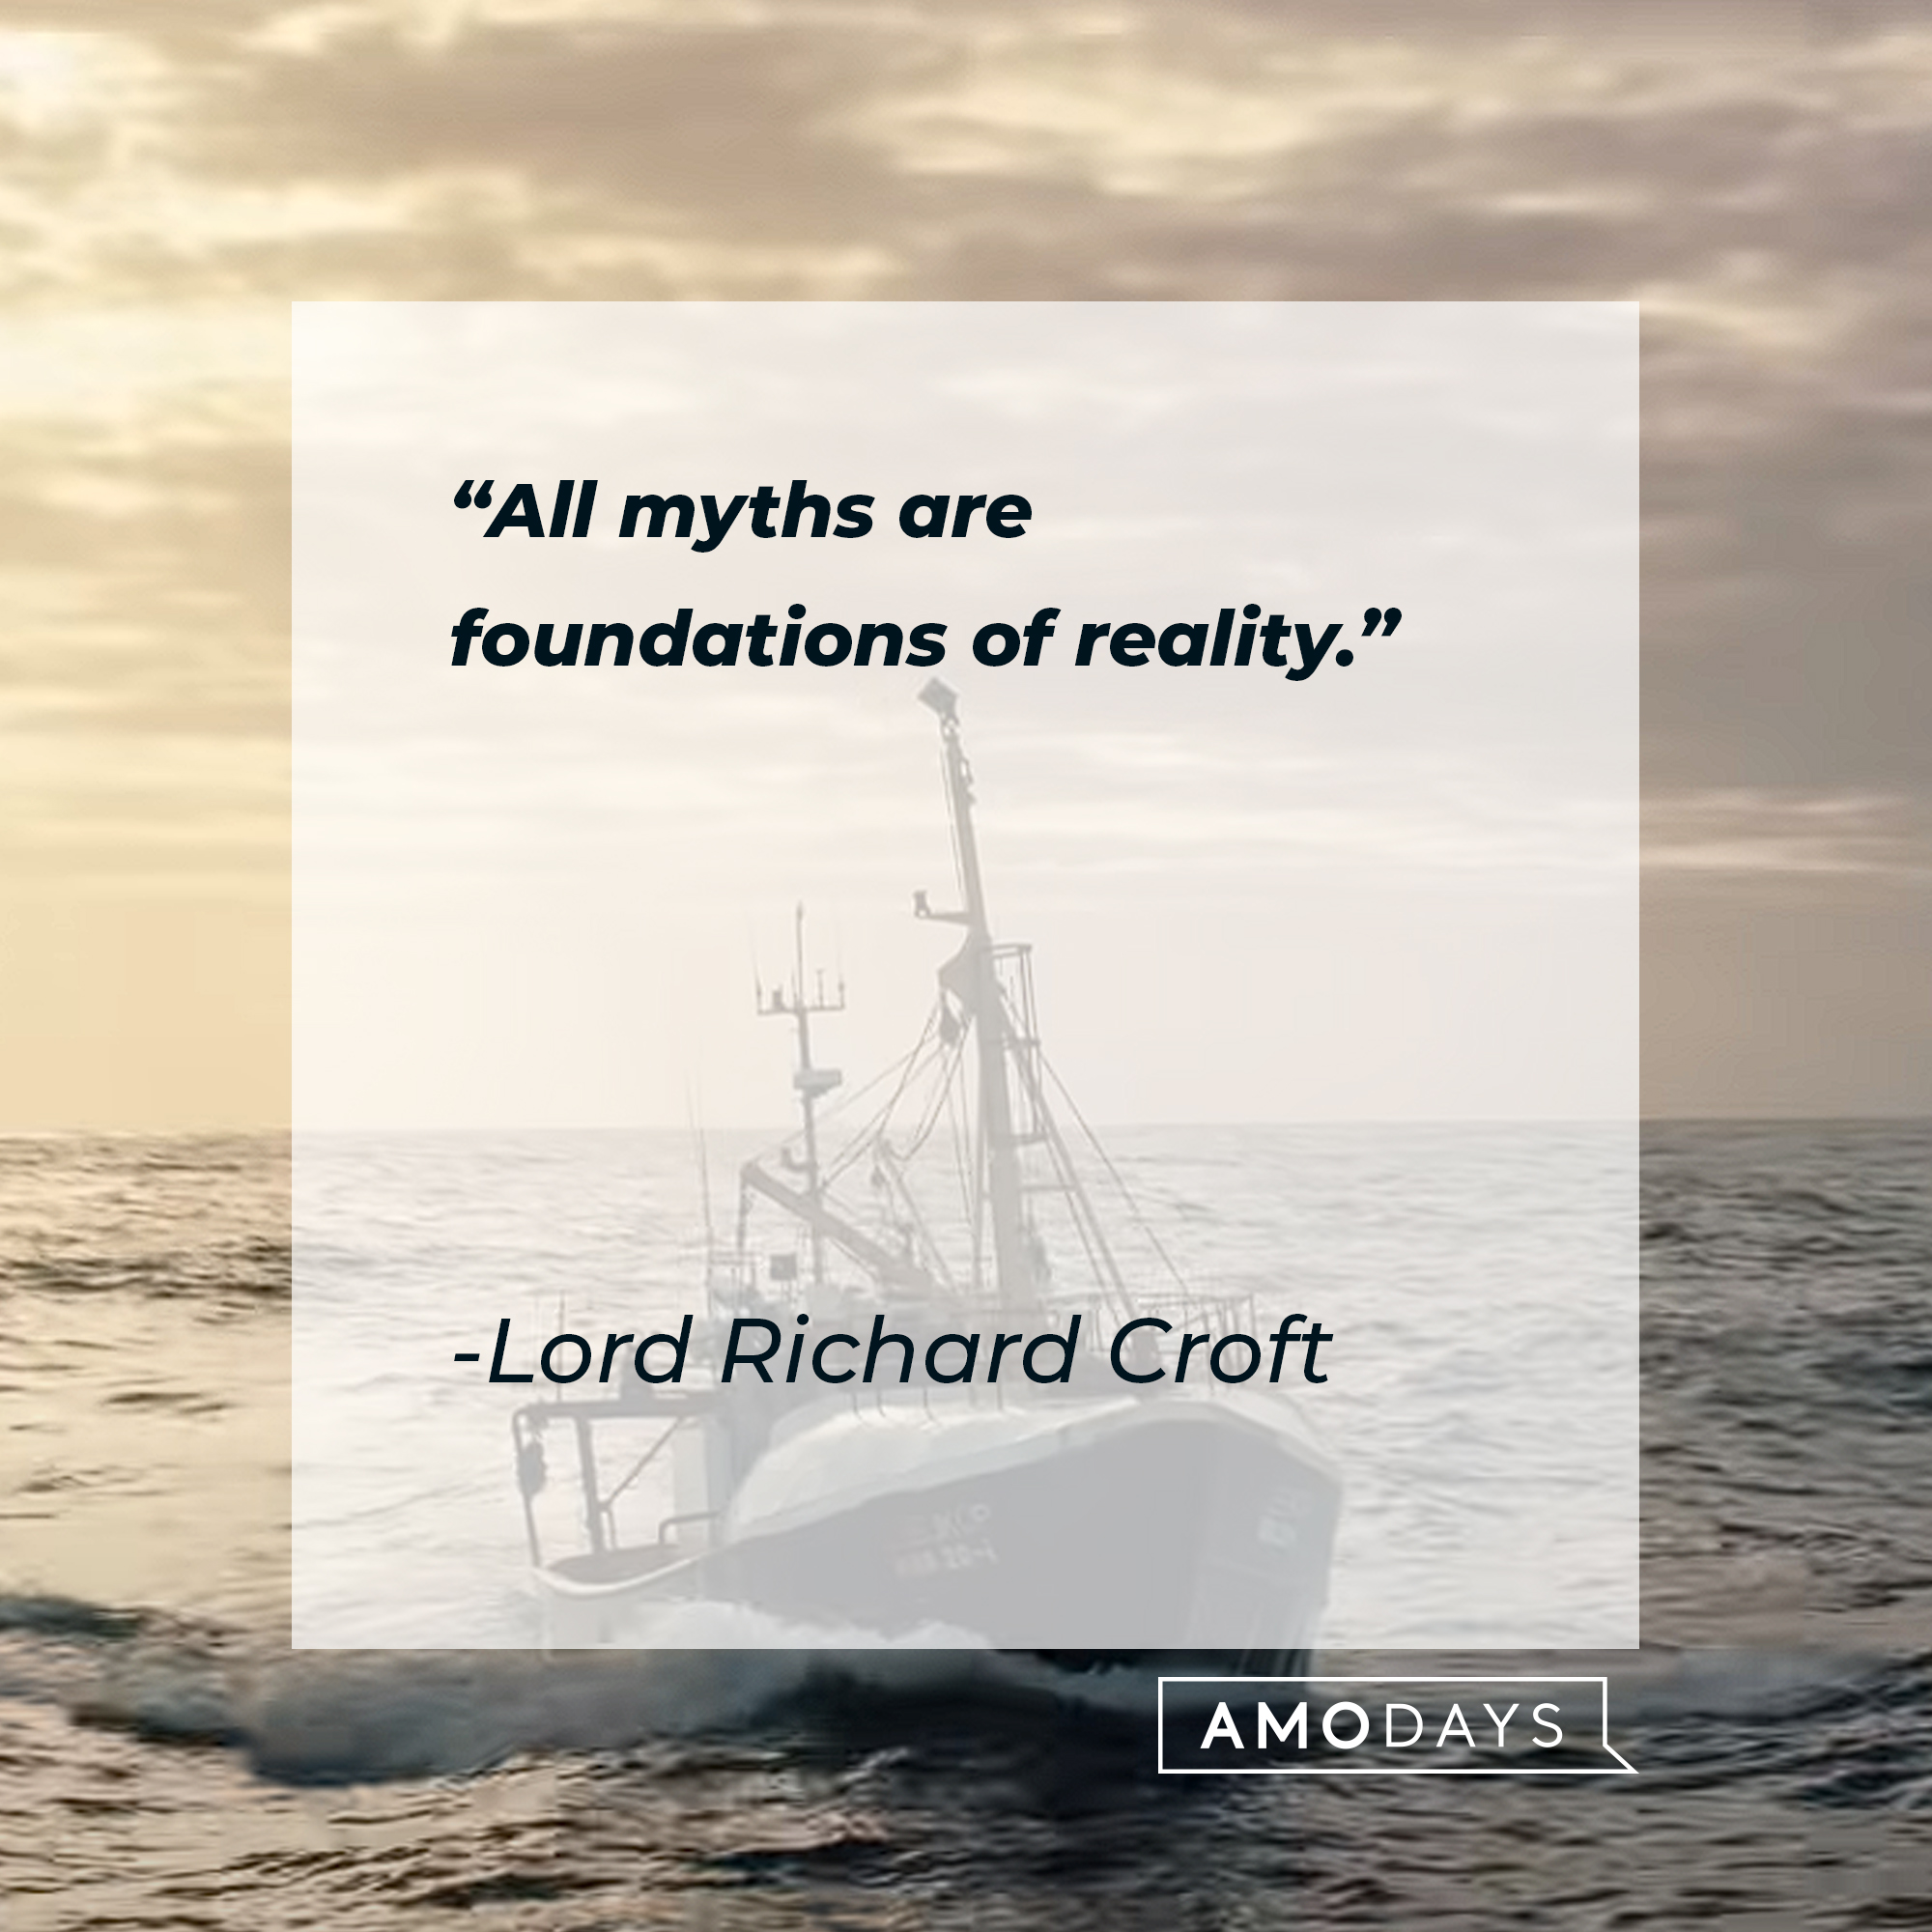 An image of a boat out at sea with a quote from the 2018 “Tombraider” by the character Lord Richard Croft: “All myth are foundations of reality.” | Source: youtube.com/WarnerBrosPictures